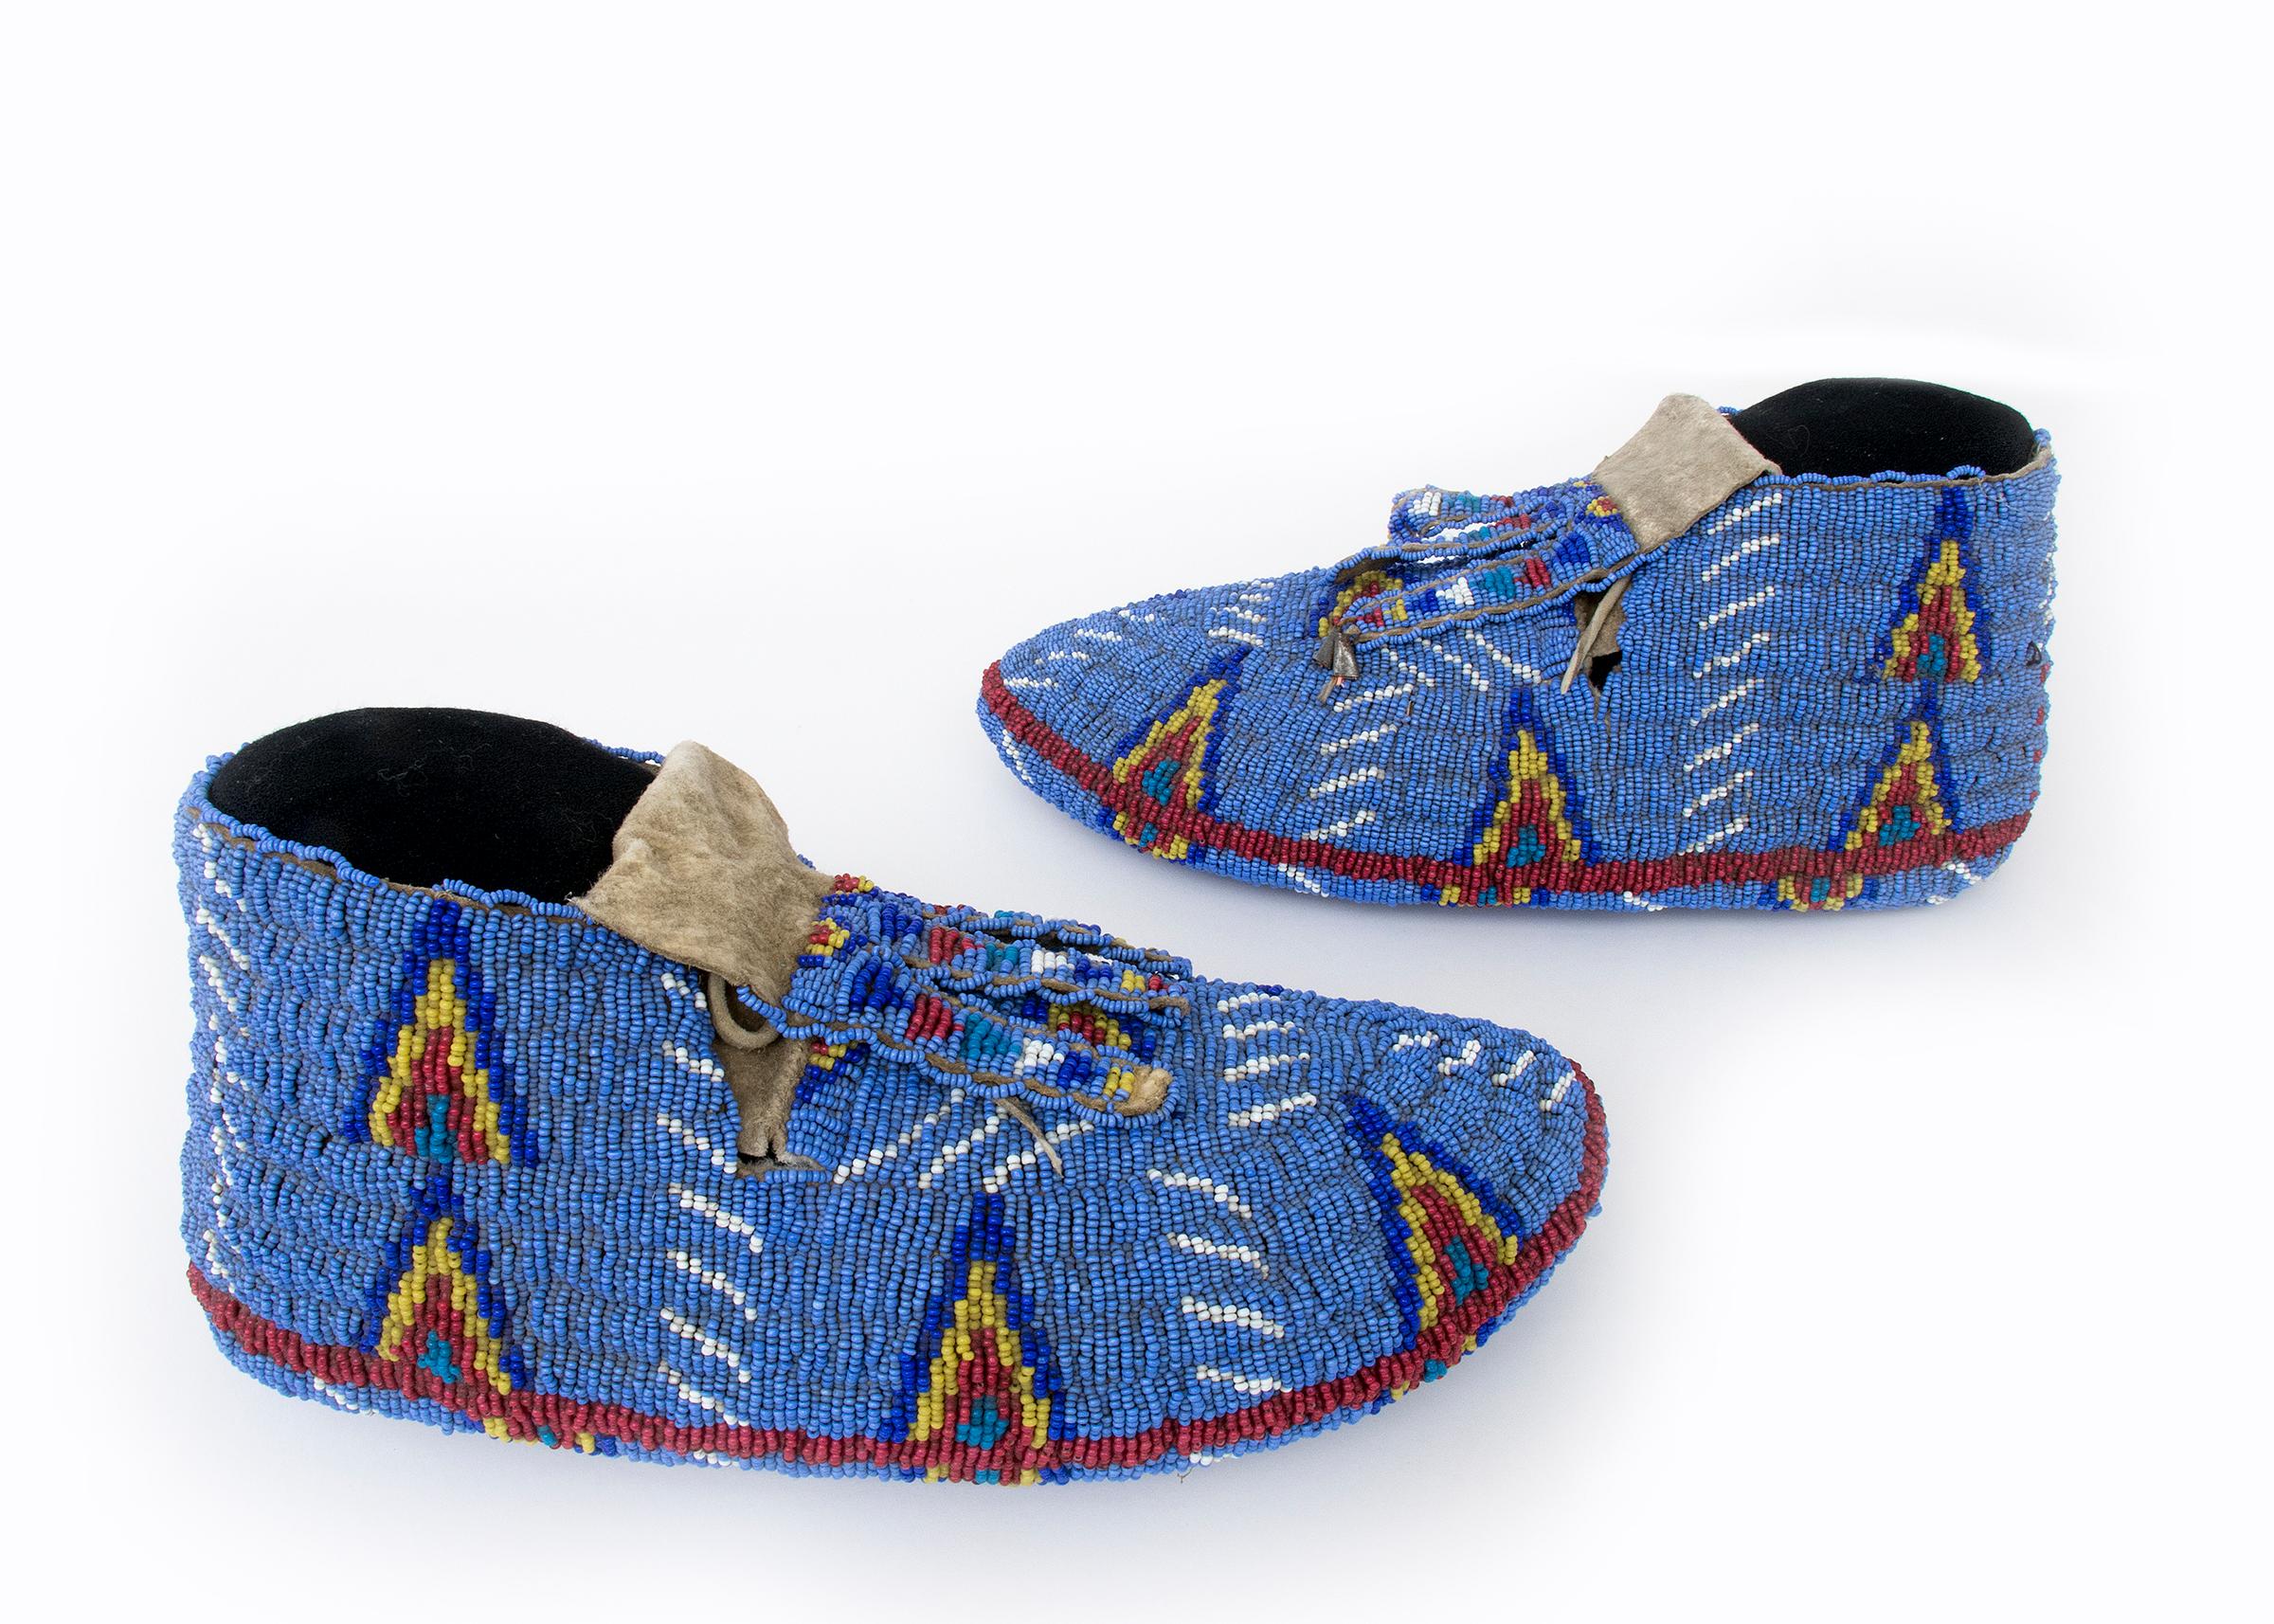 Vintage Native American moccasins, Sioux (Plains Indian) ceremonial style, fully beaded including the soles. Hide, beaded with glass trade beads in colors of blue, red, yellow and white, Pictorial elements include stylized tepee elements against a